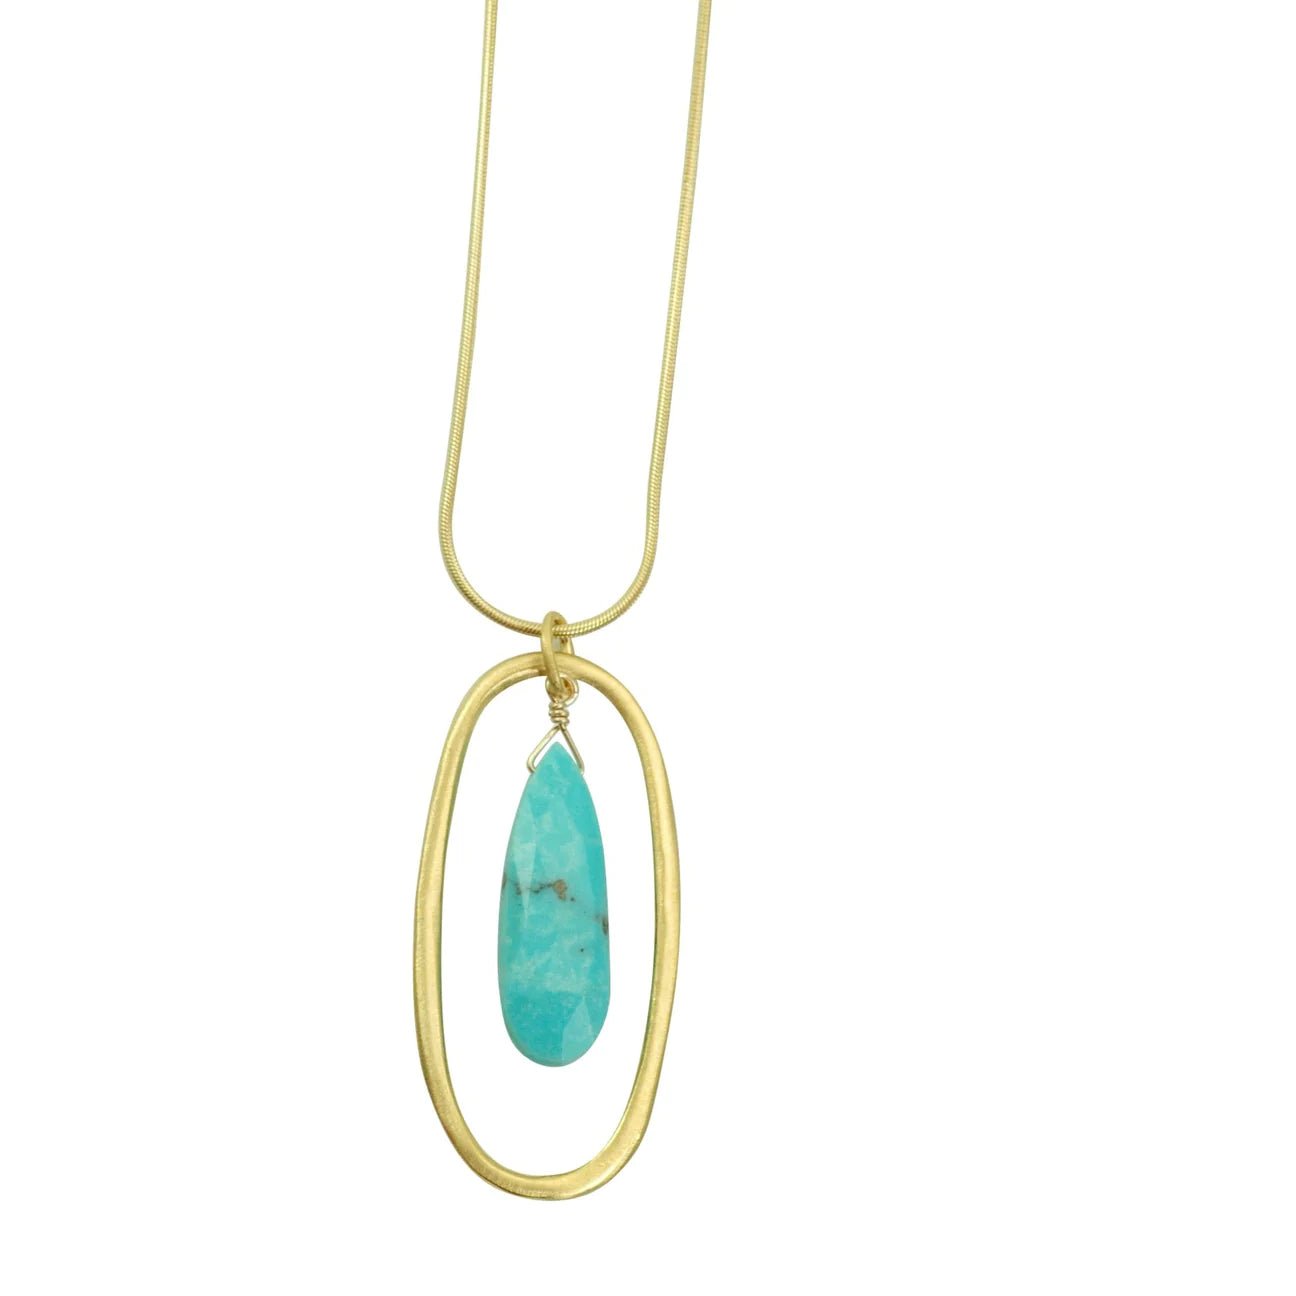 medium oval w. turquoise necklace - The Riviera Towel Company